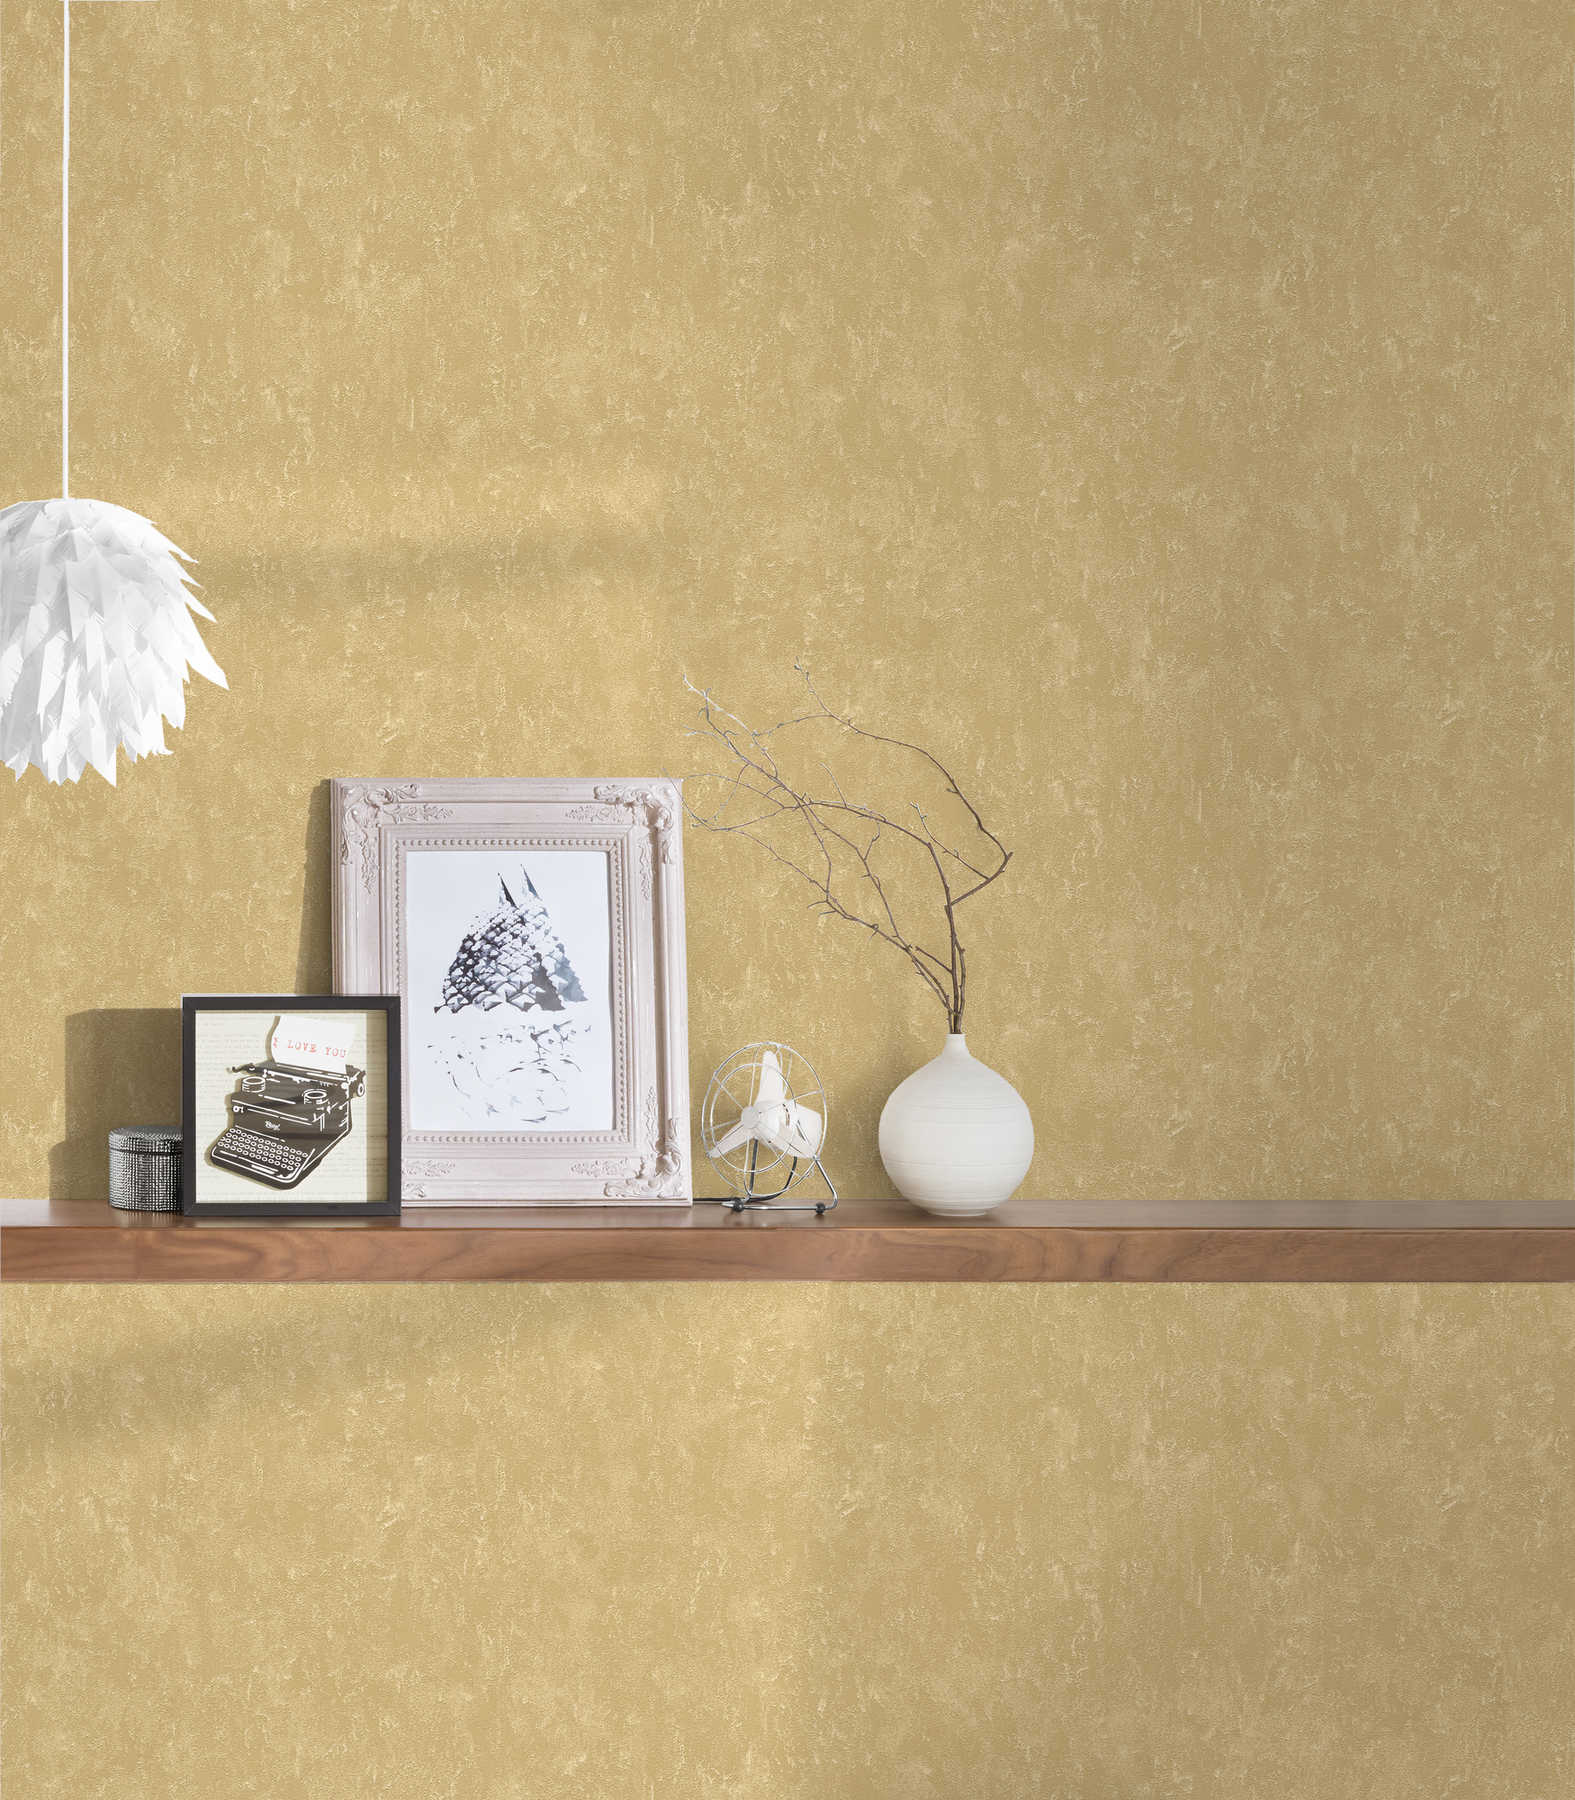             Wallpaper gold plain with metallic luster & embossed texture
        